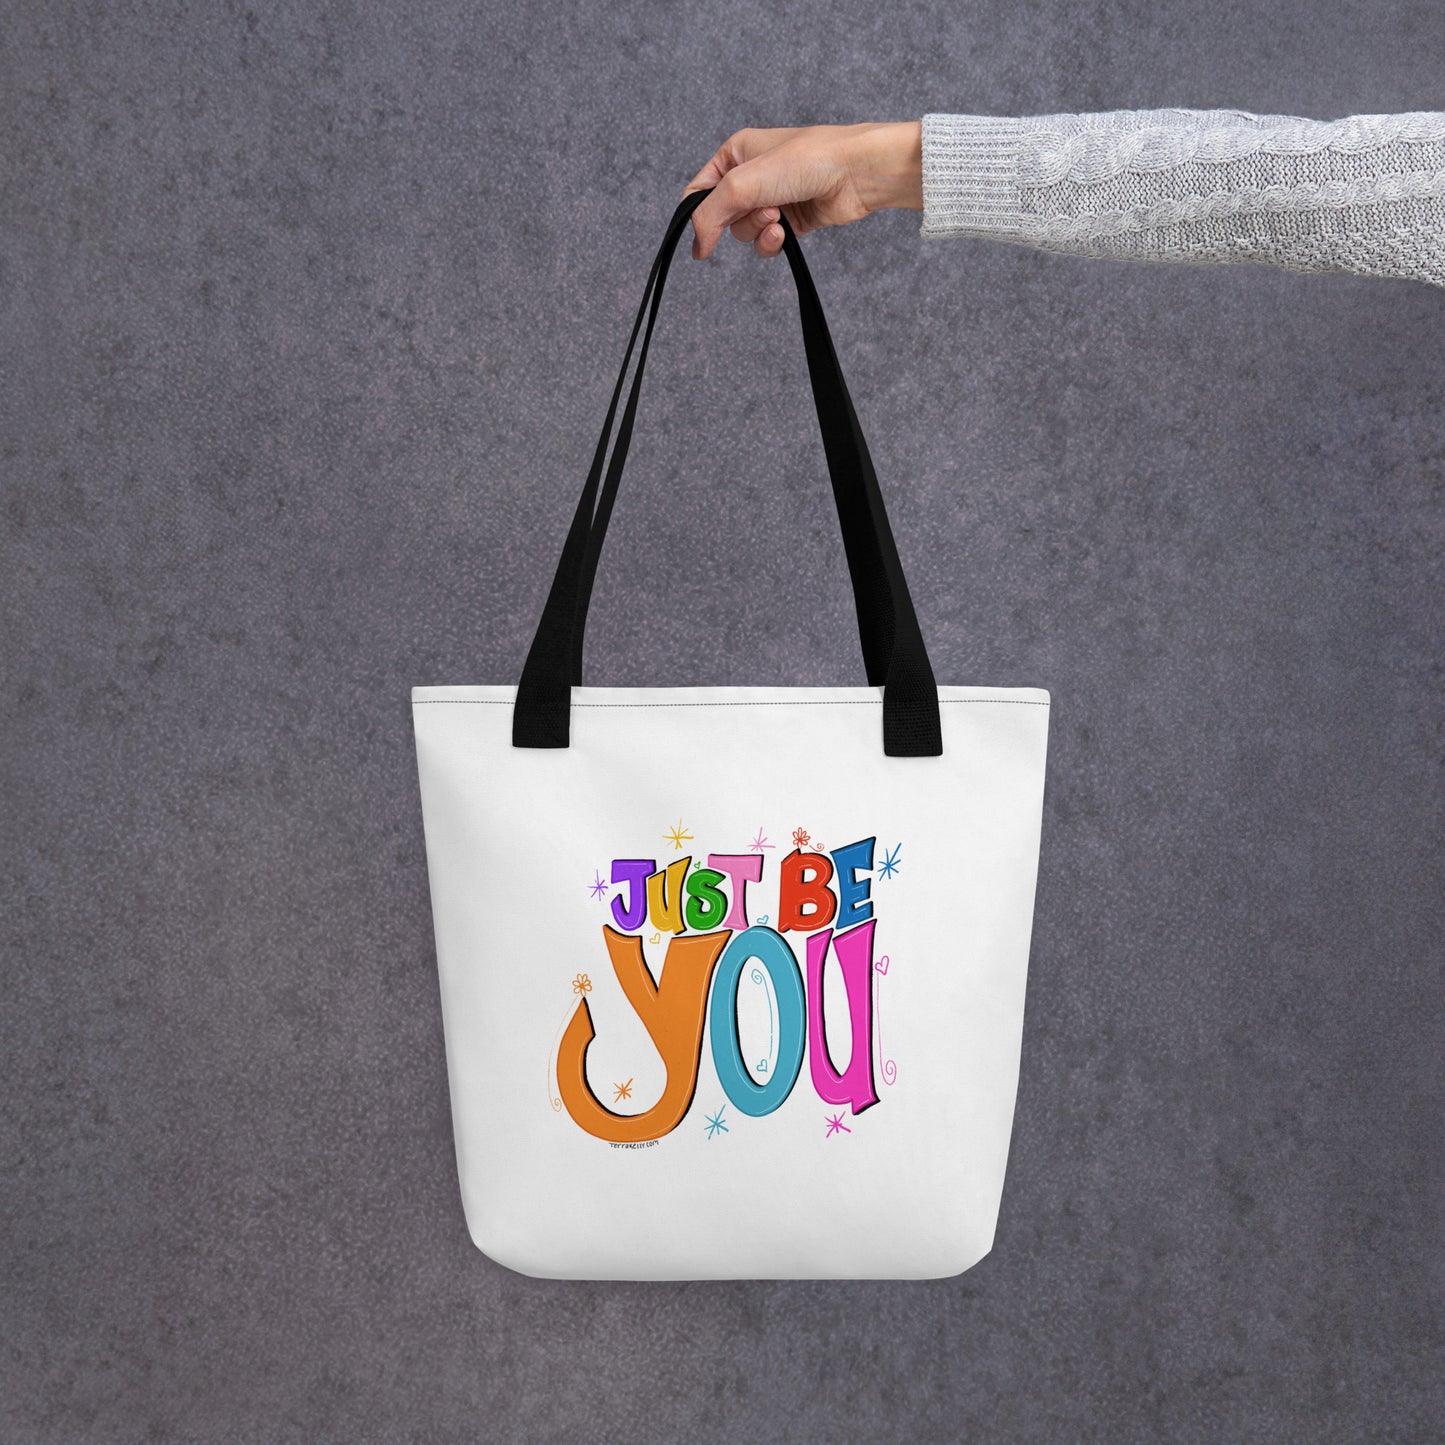 Just Be You Tote | Reusable Bag | FREE SHIPPING